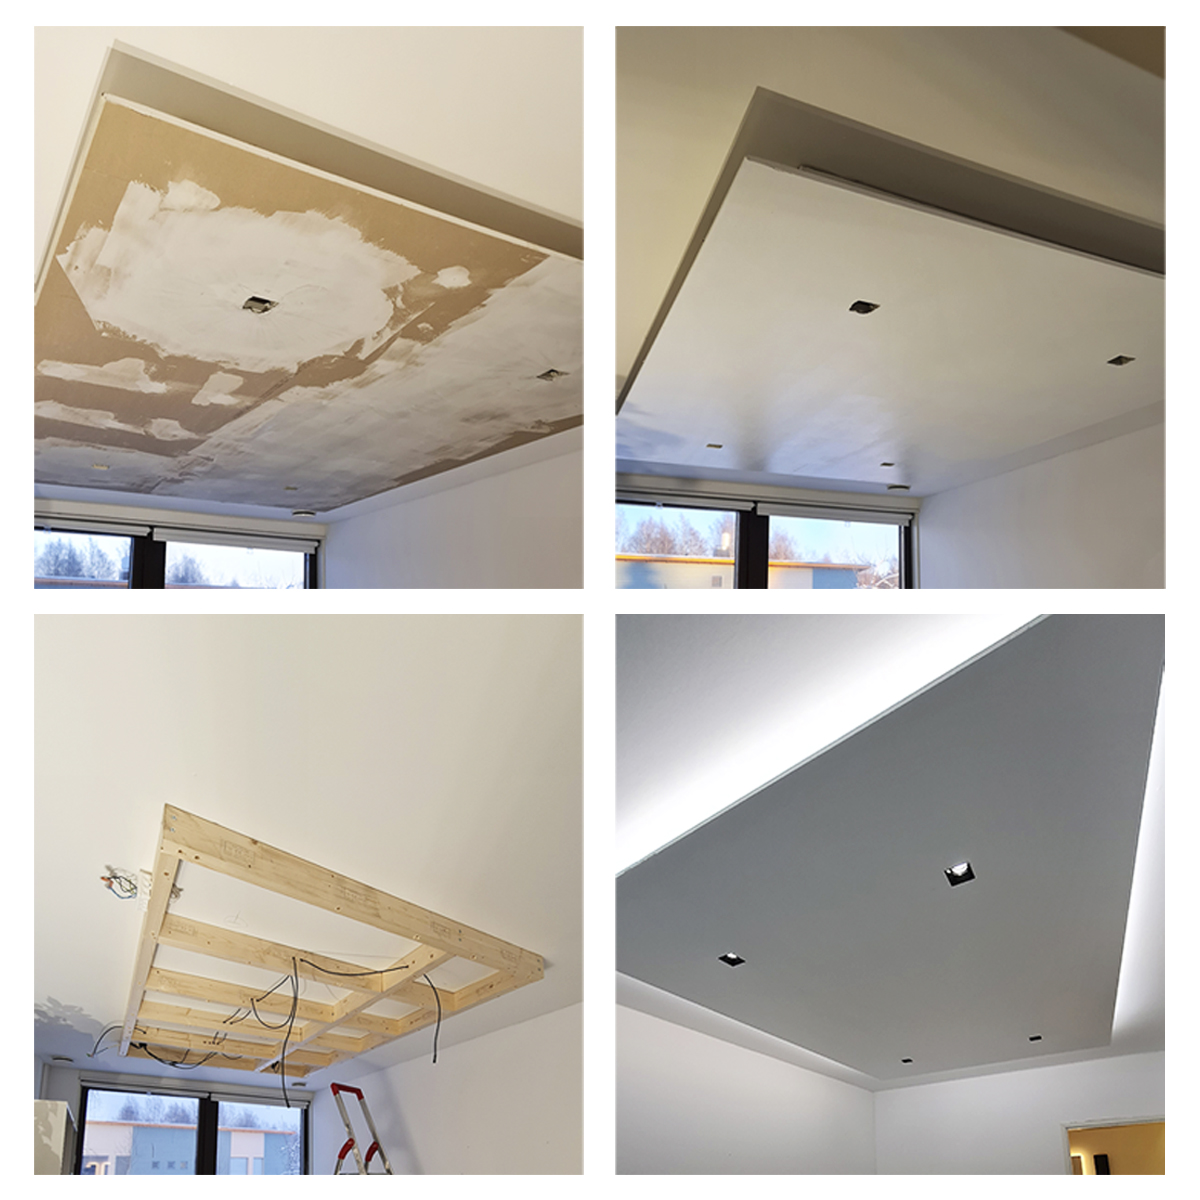 Lowered ceilings at different stages of work